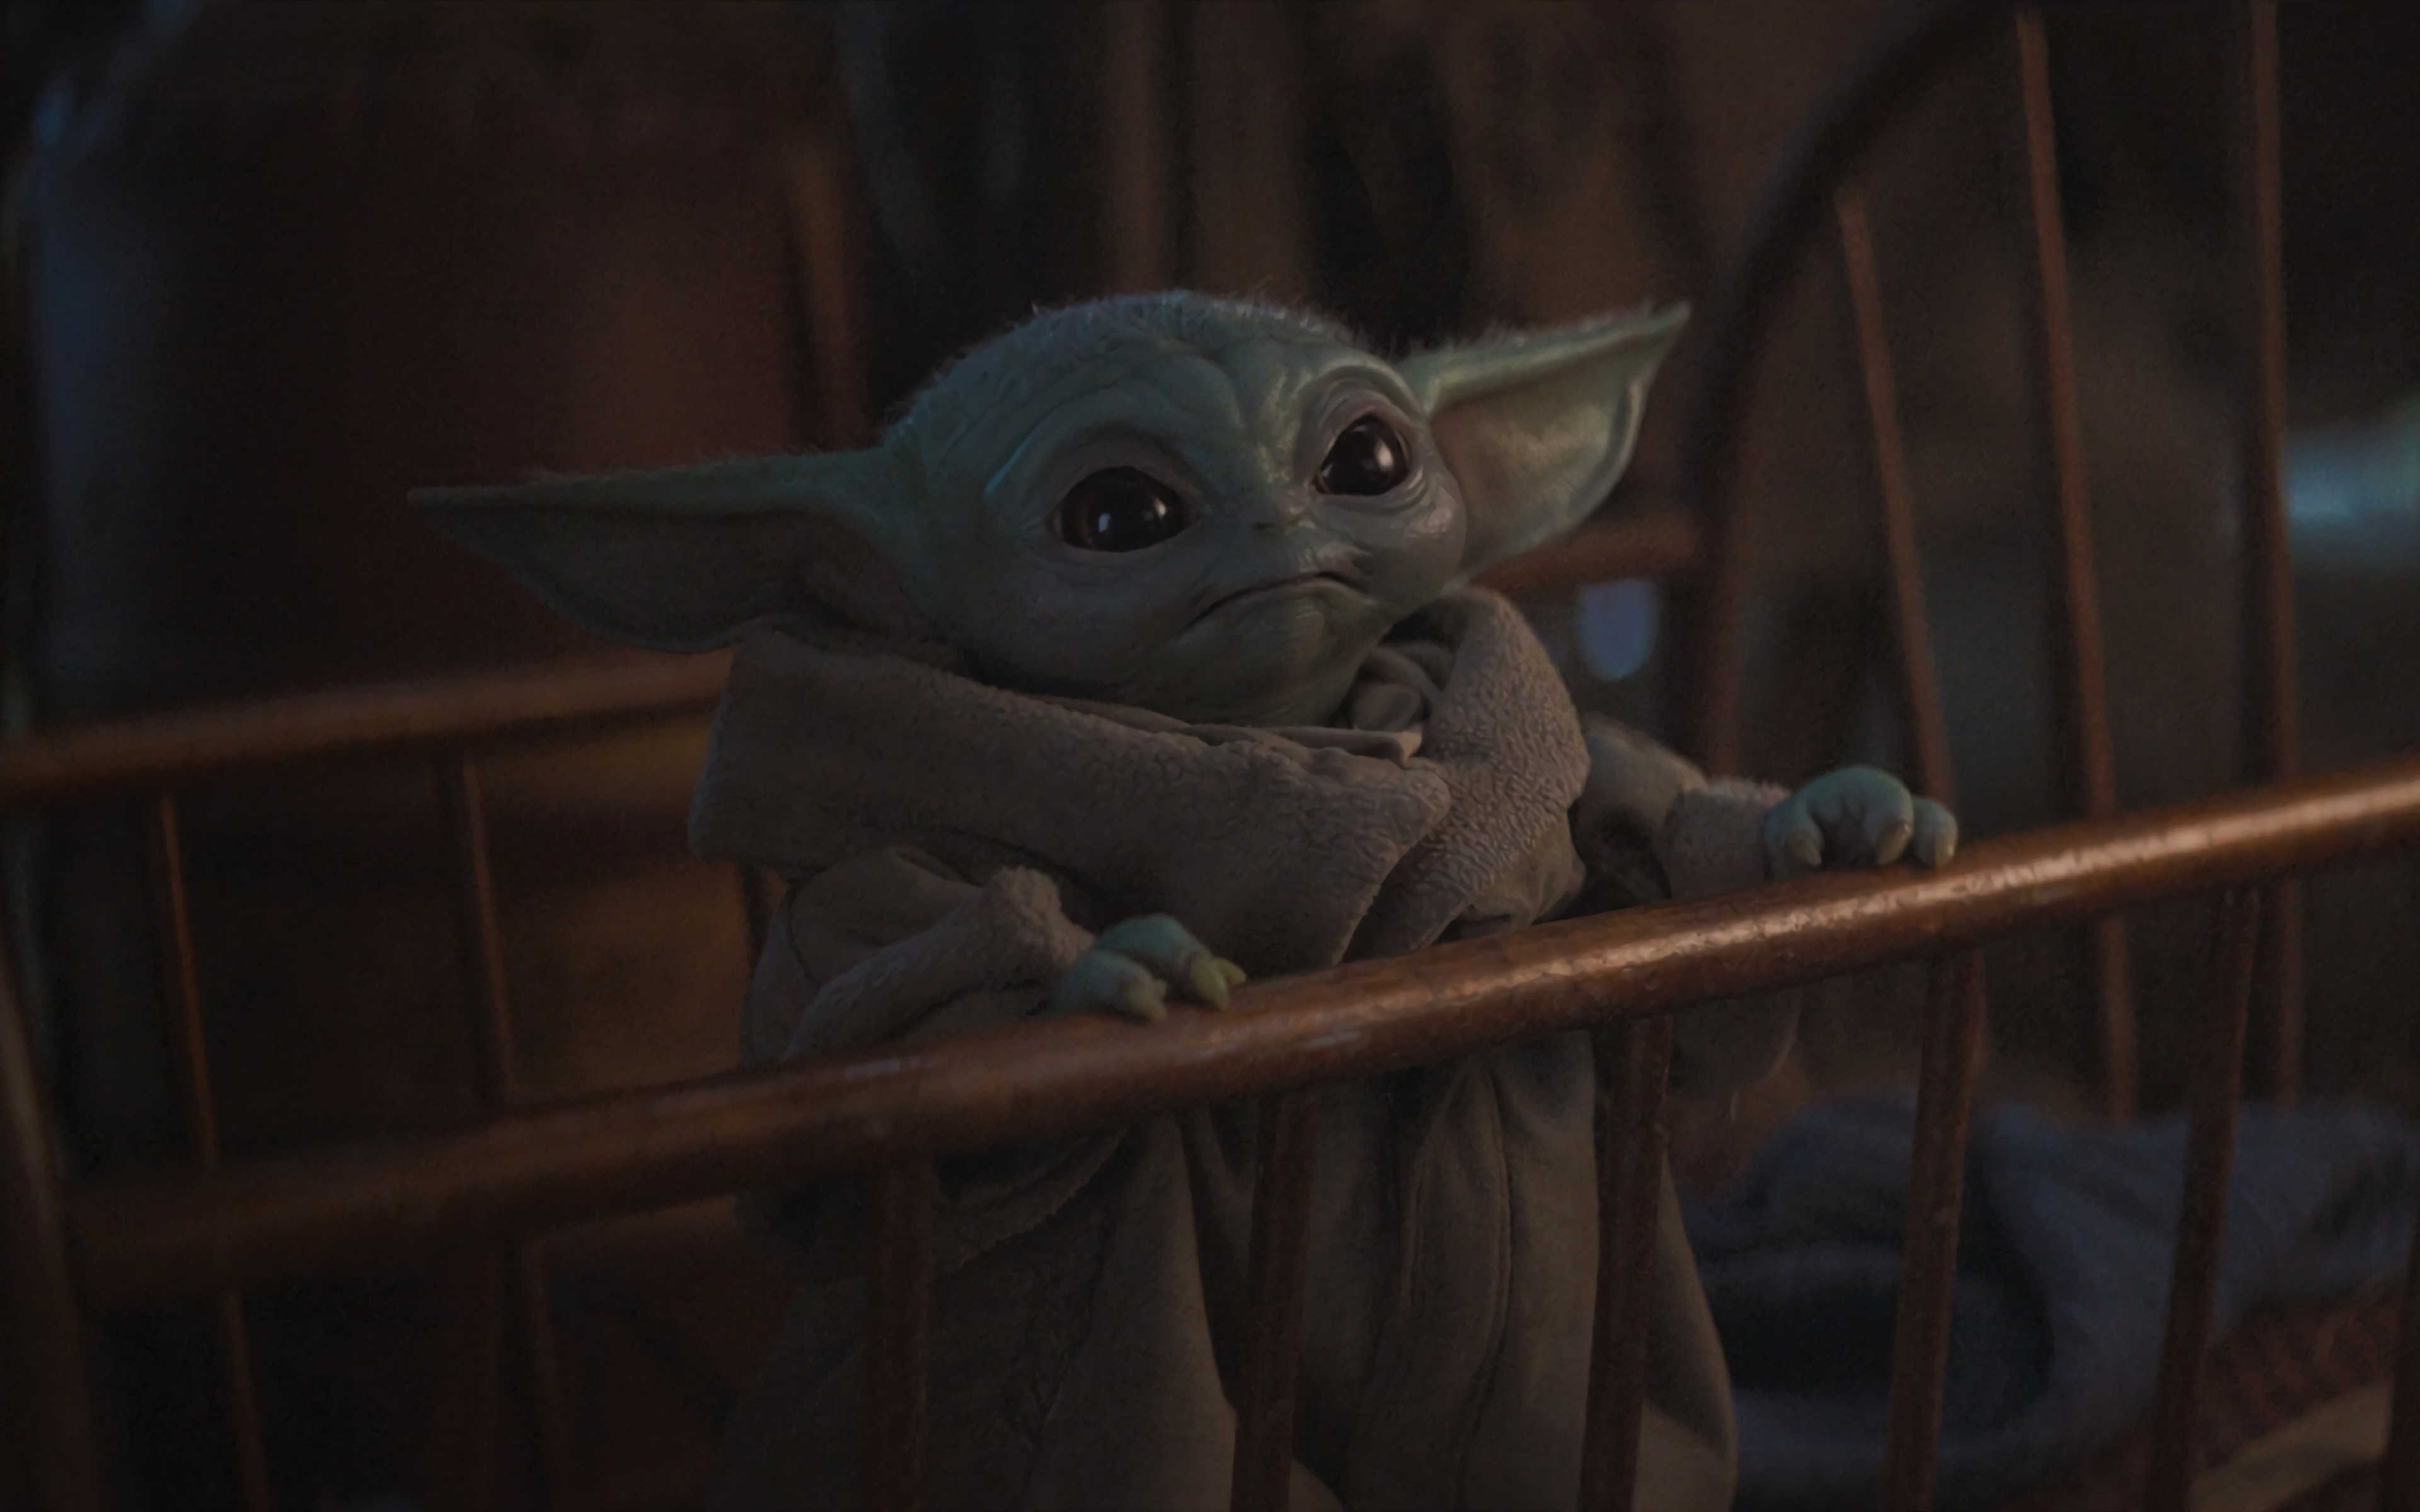 3840x2400 Cute Baby Yoda From Mandalorian Uhd 4k 3840x2400 Resolution Wallpaper Hd Tv Series 4k Wallpapers Images Photos And Background Wallpapers Den